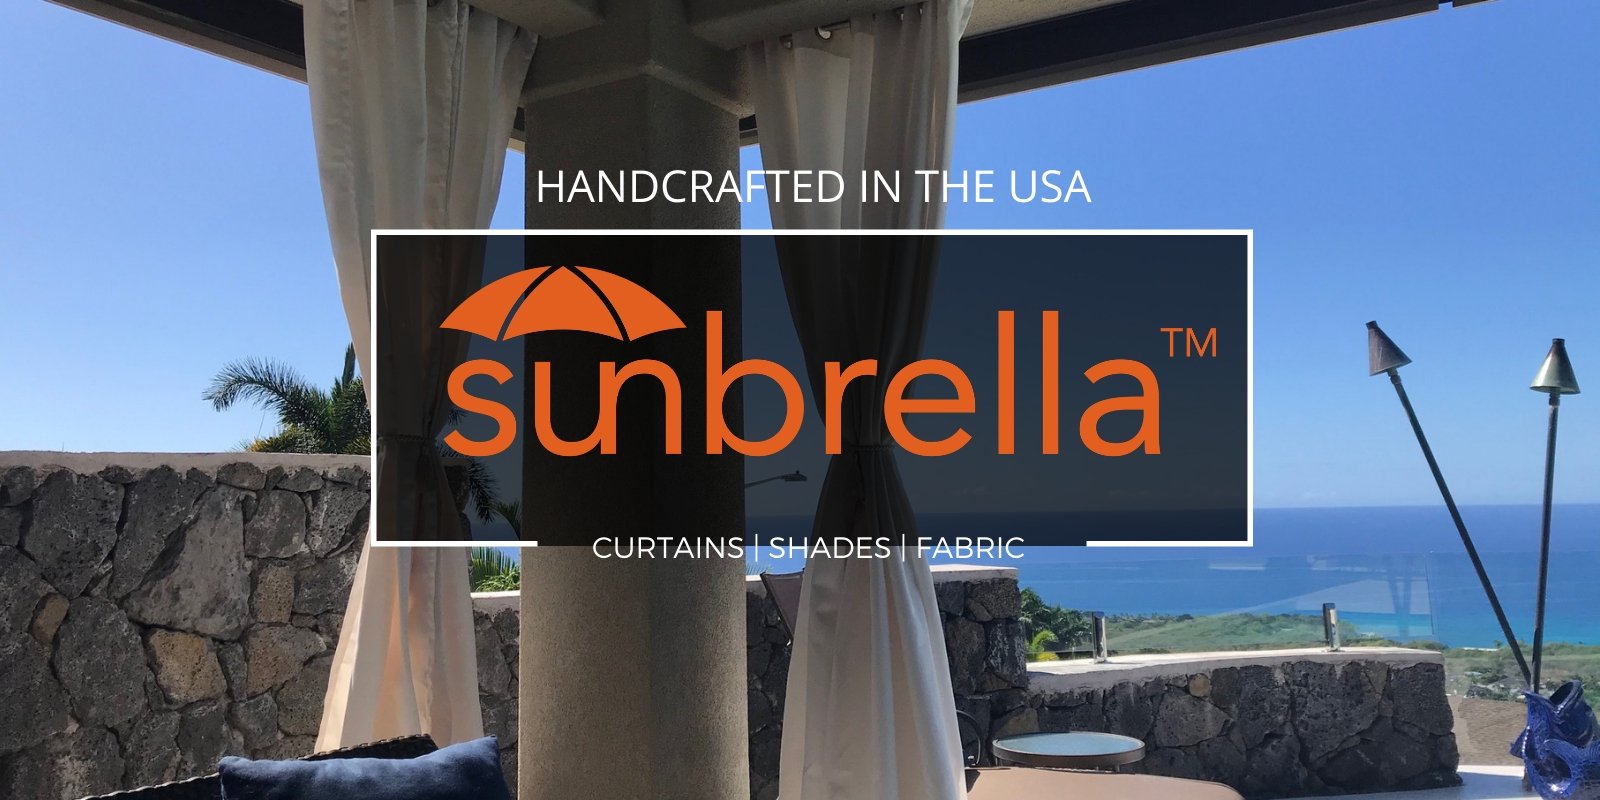 Sunbrella Outdoor Curtains - Handcrafted in the USA